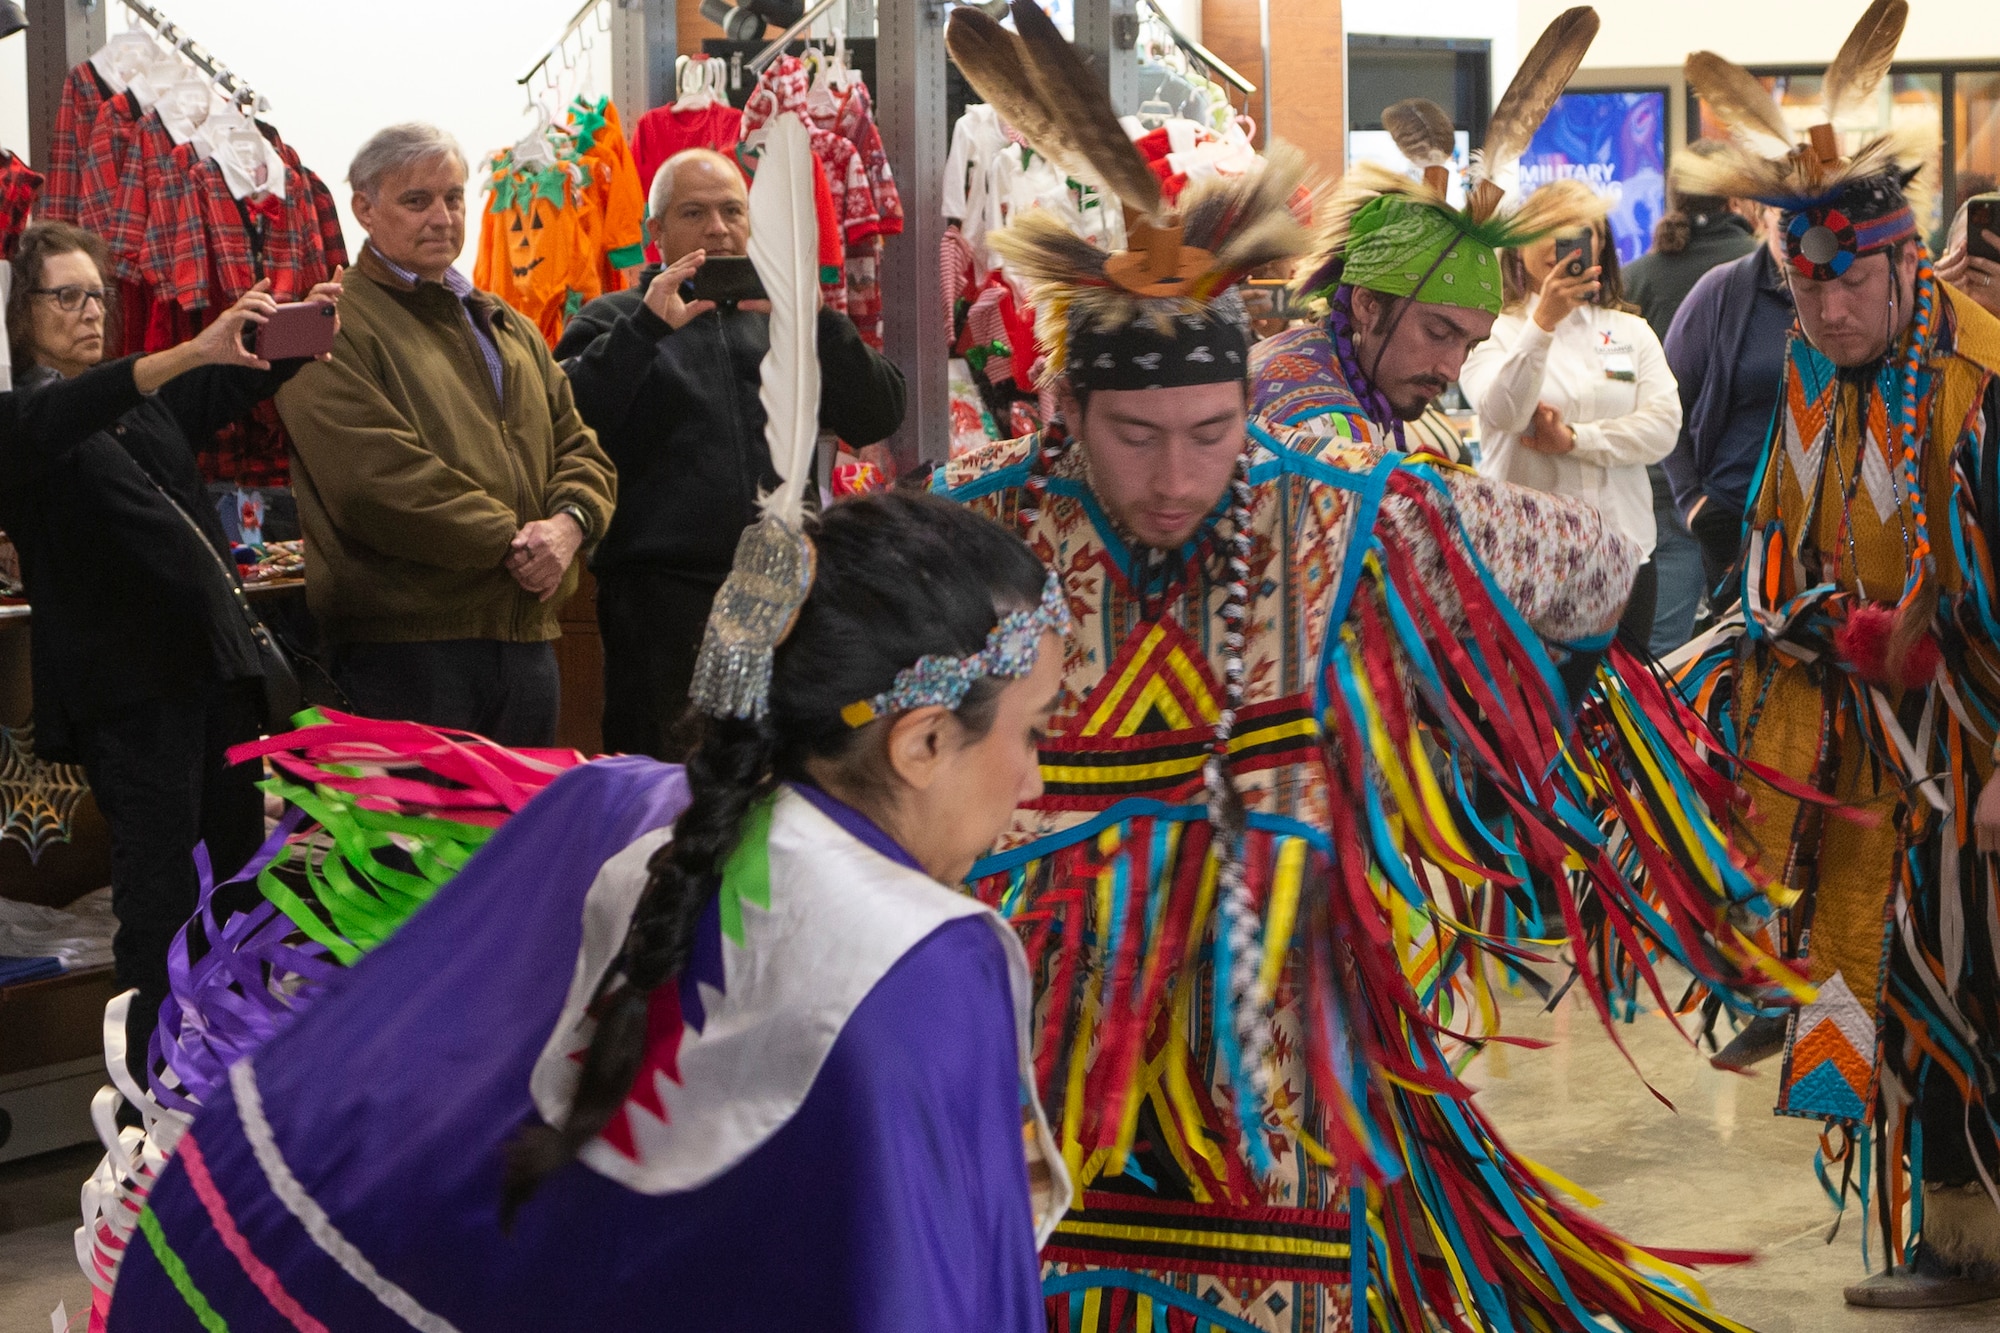 From Nov. 1-30, the observance month recognizes American Indians for their respect for natural resources and the Earth, having served with valor in our nation's conflicts and for their many distinct and important contributions to the United States. The month is a time to celebrate rich and diverse cultures, traditions, and histories and to acknowledge the important contributions of native people.